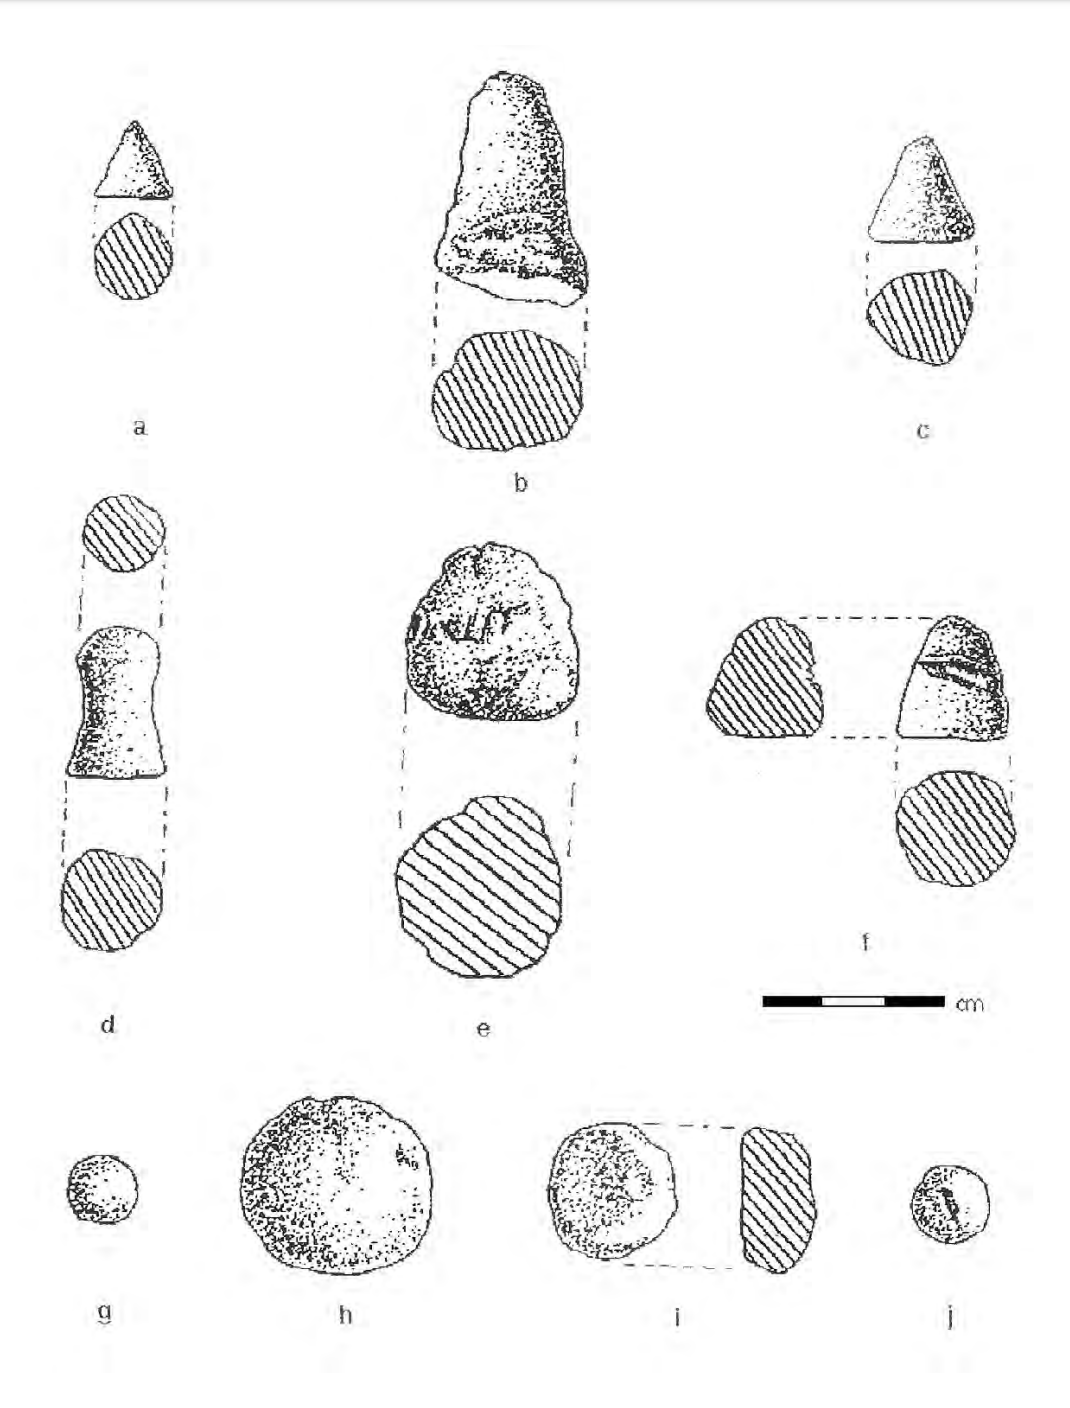 Drawings of profiles and cross sections of the various types